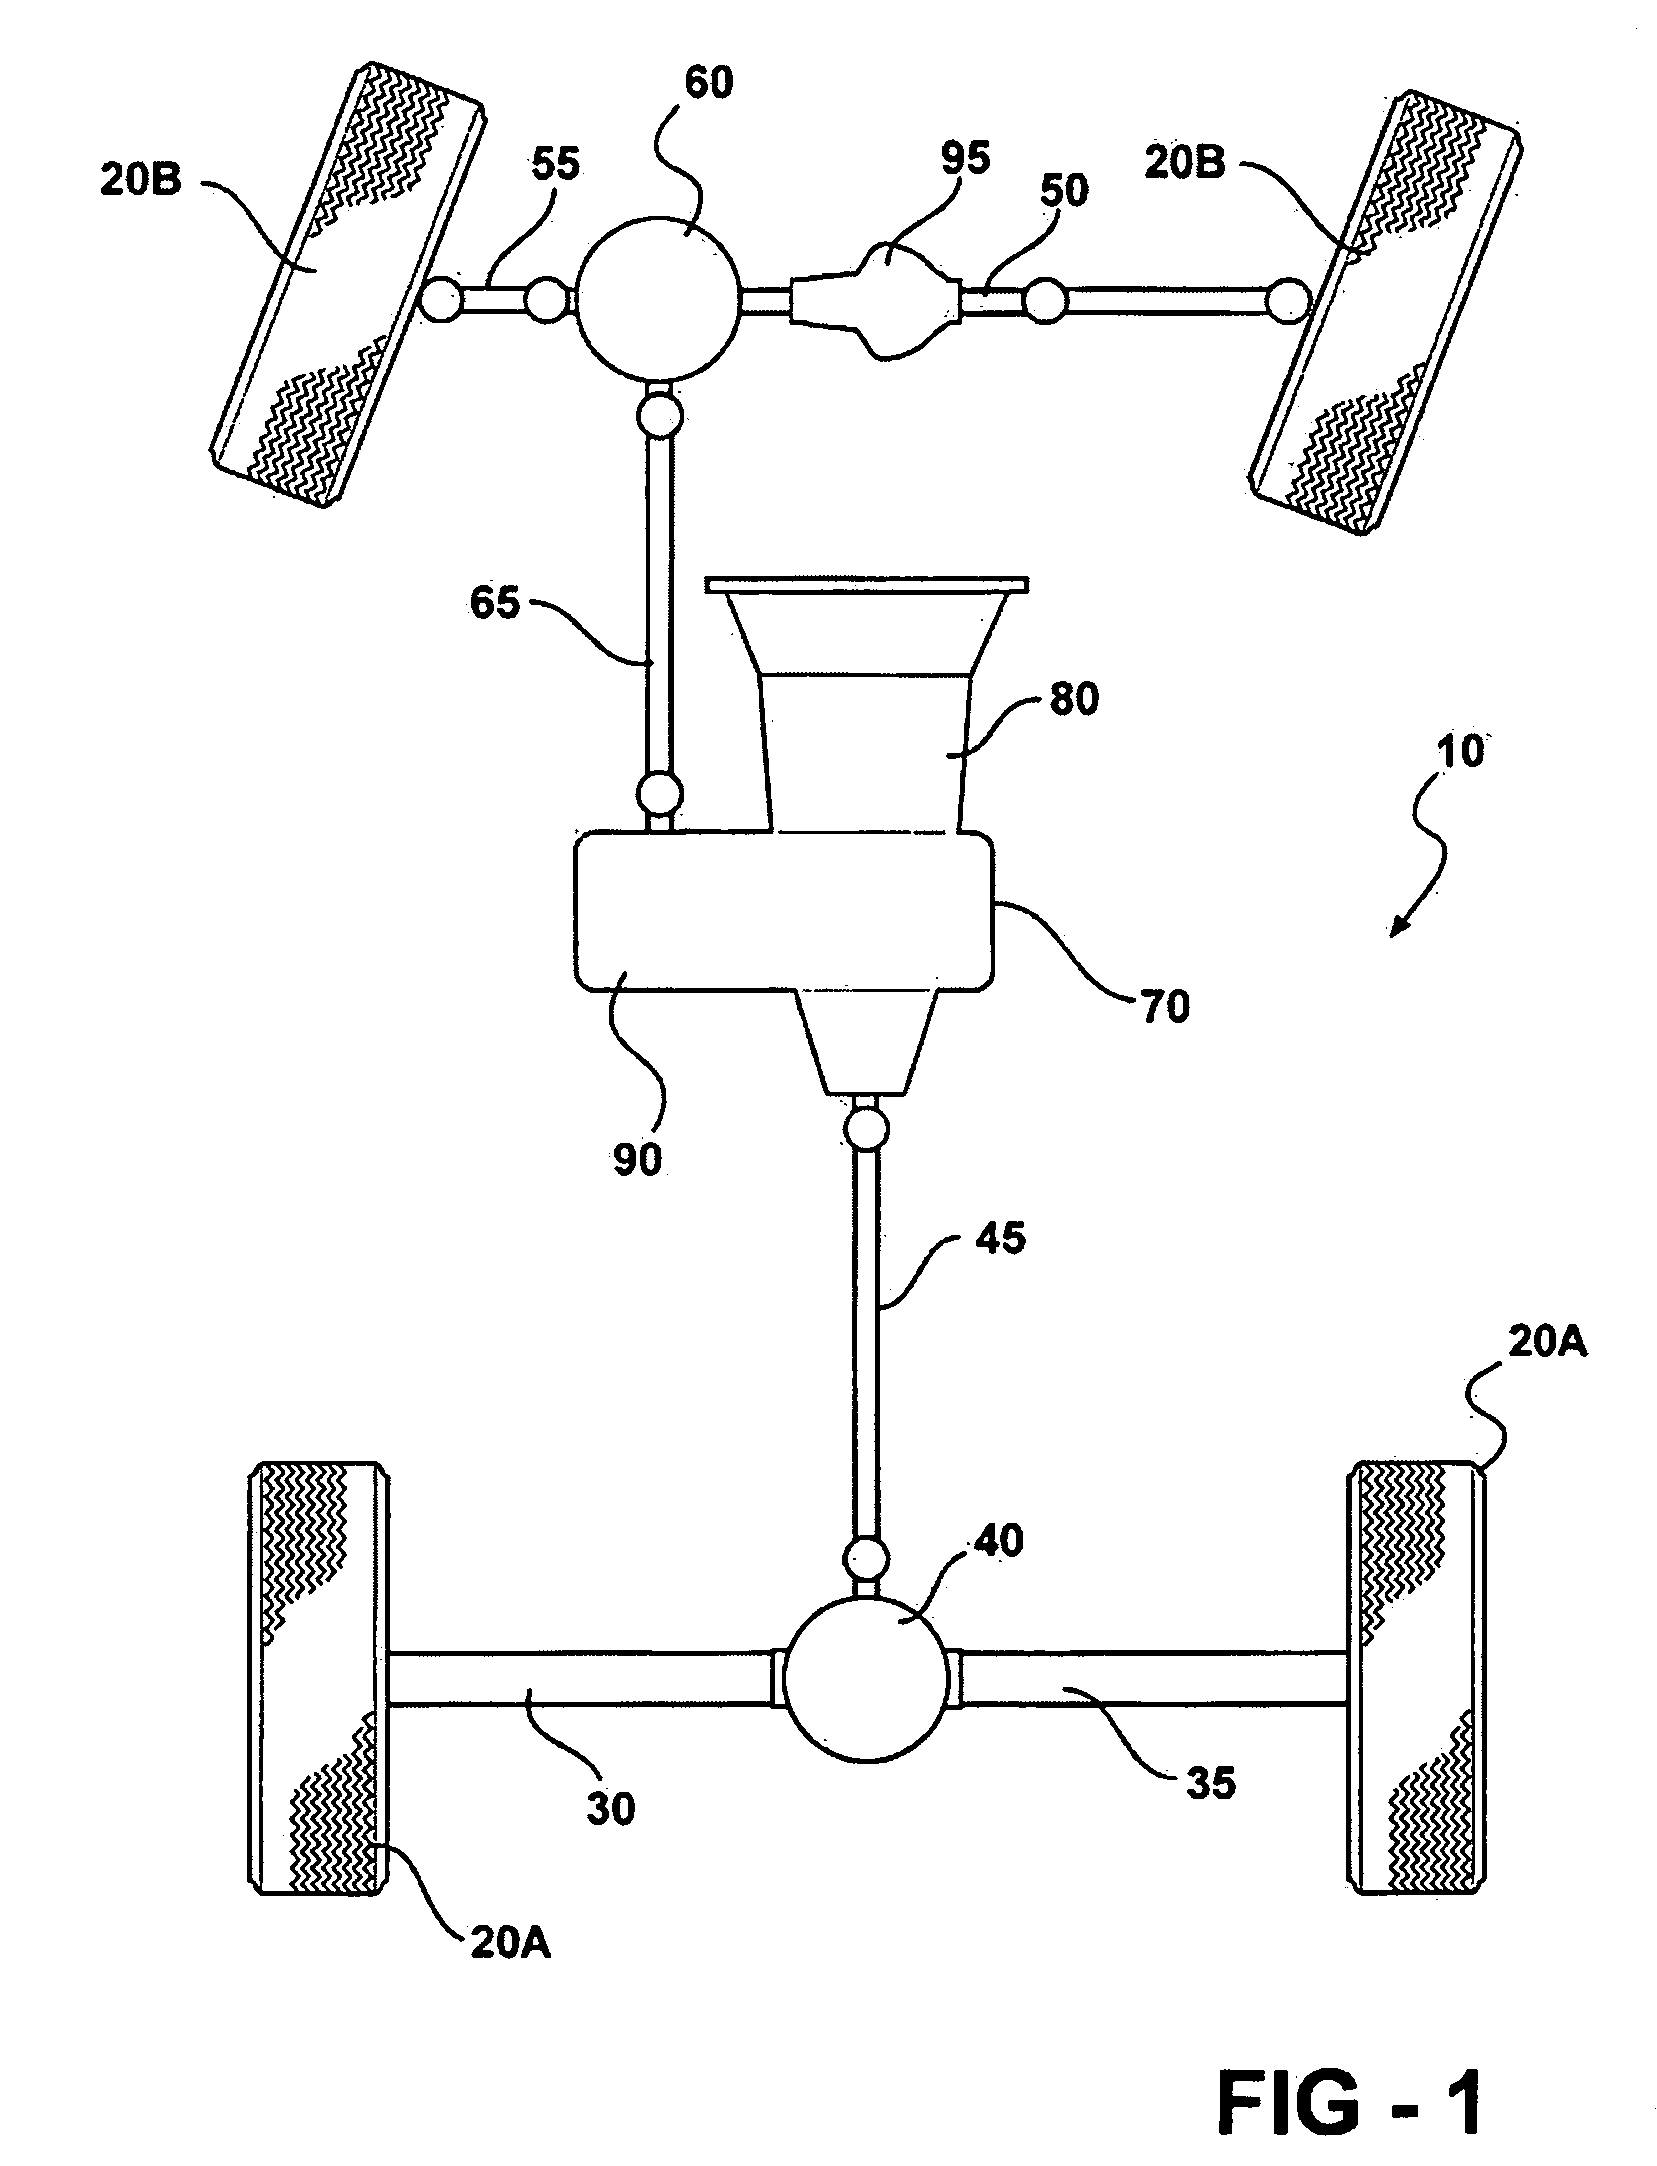 Secondary drive axle disconnect for a motor vehicle